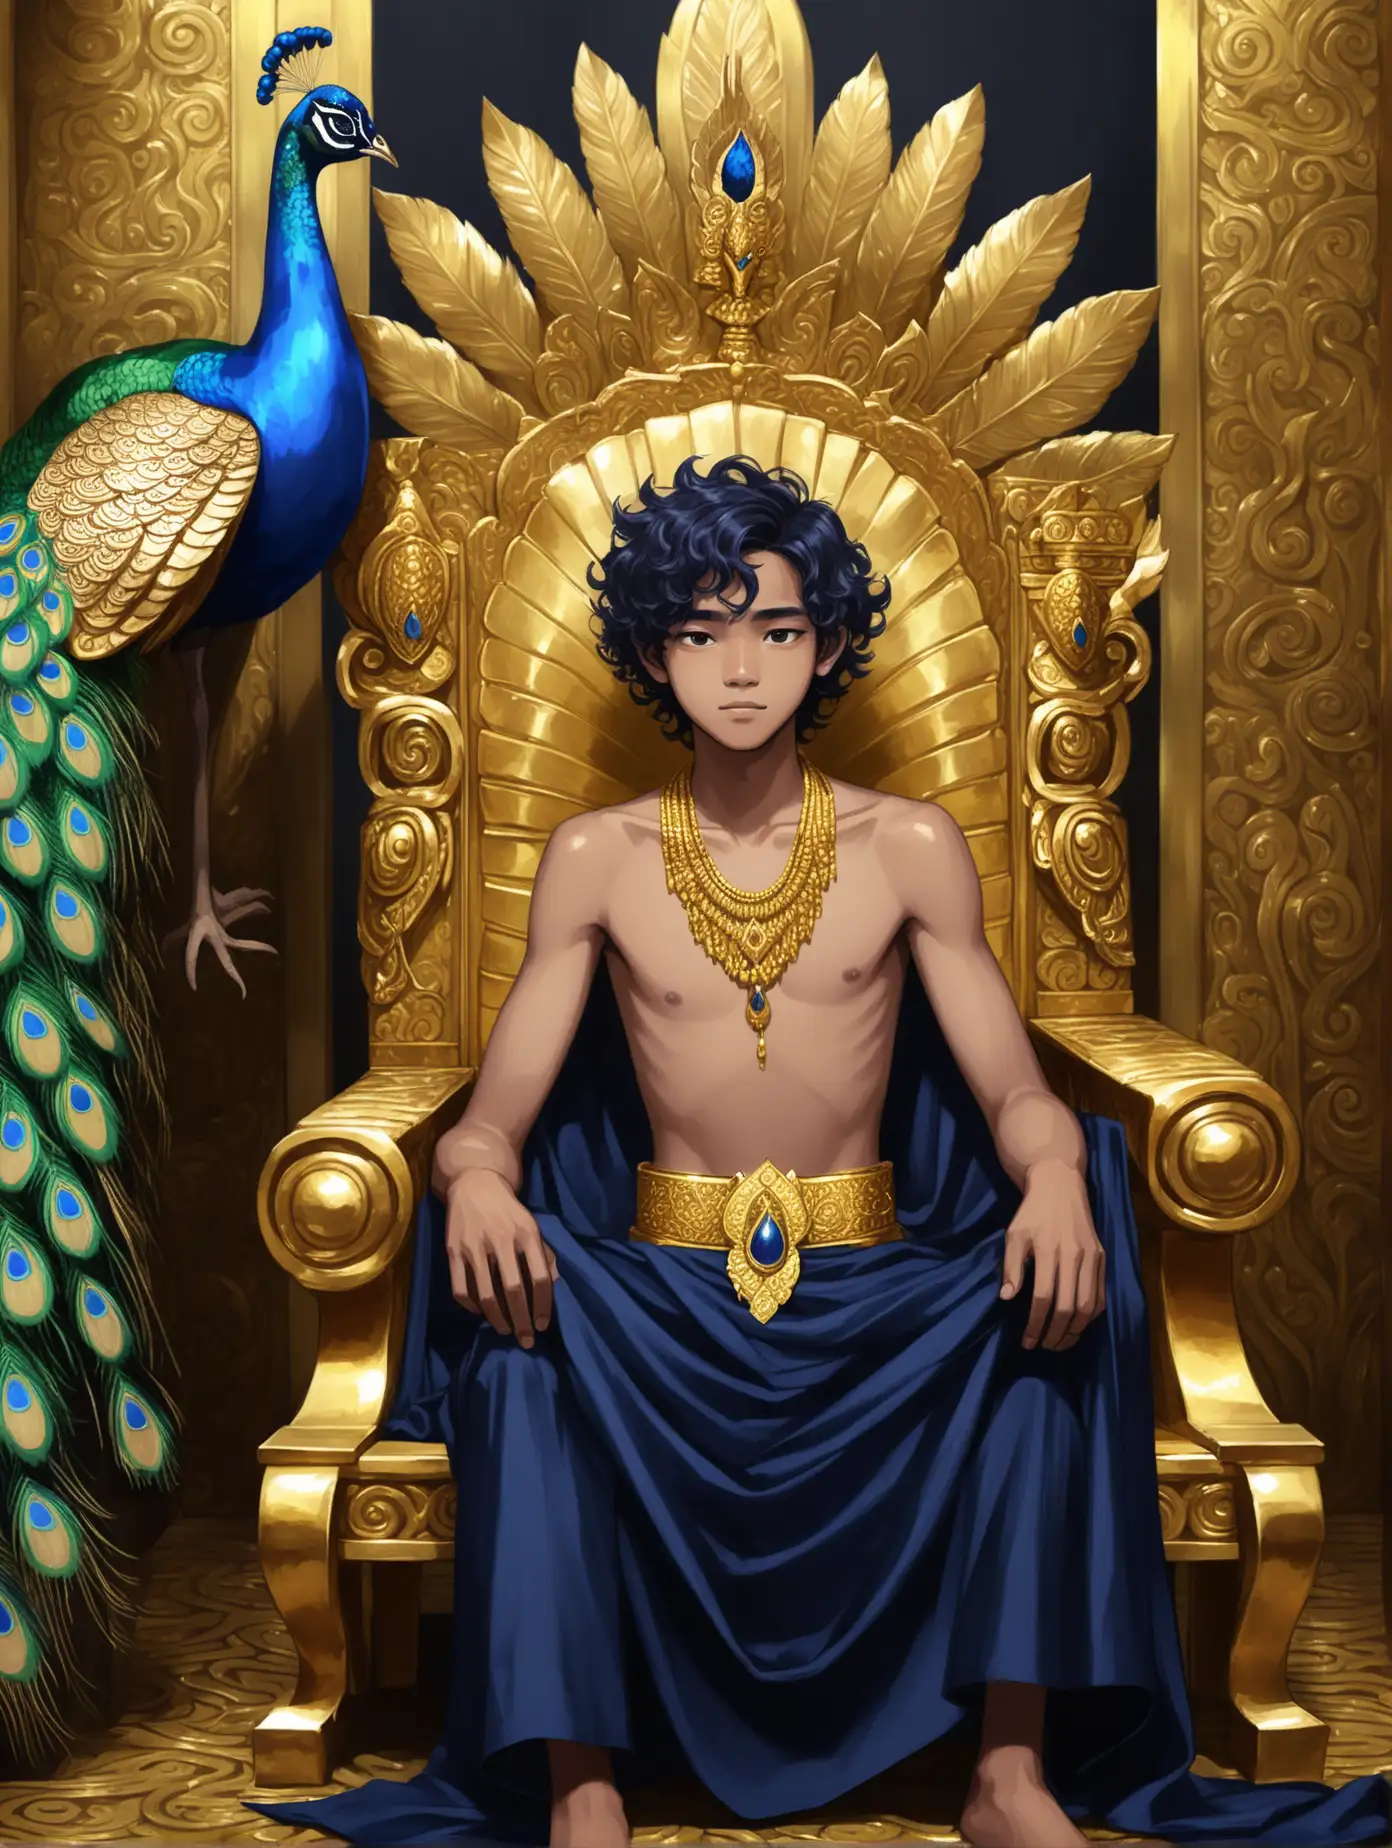 Indonesian-Teen-on-Golden-Throne-with-Peacock-Royal-Portrait-of-17YearOld-Indonesian-King